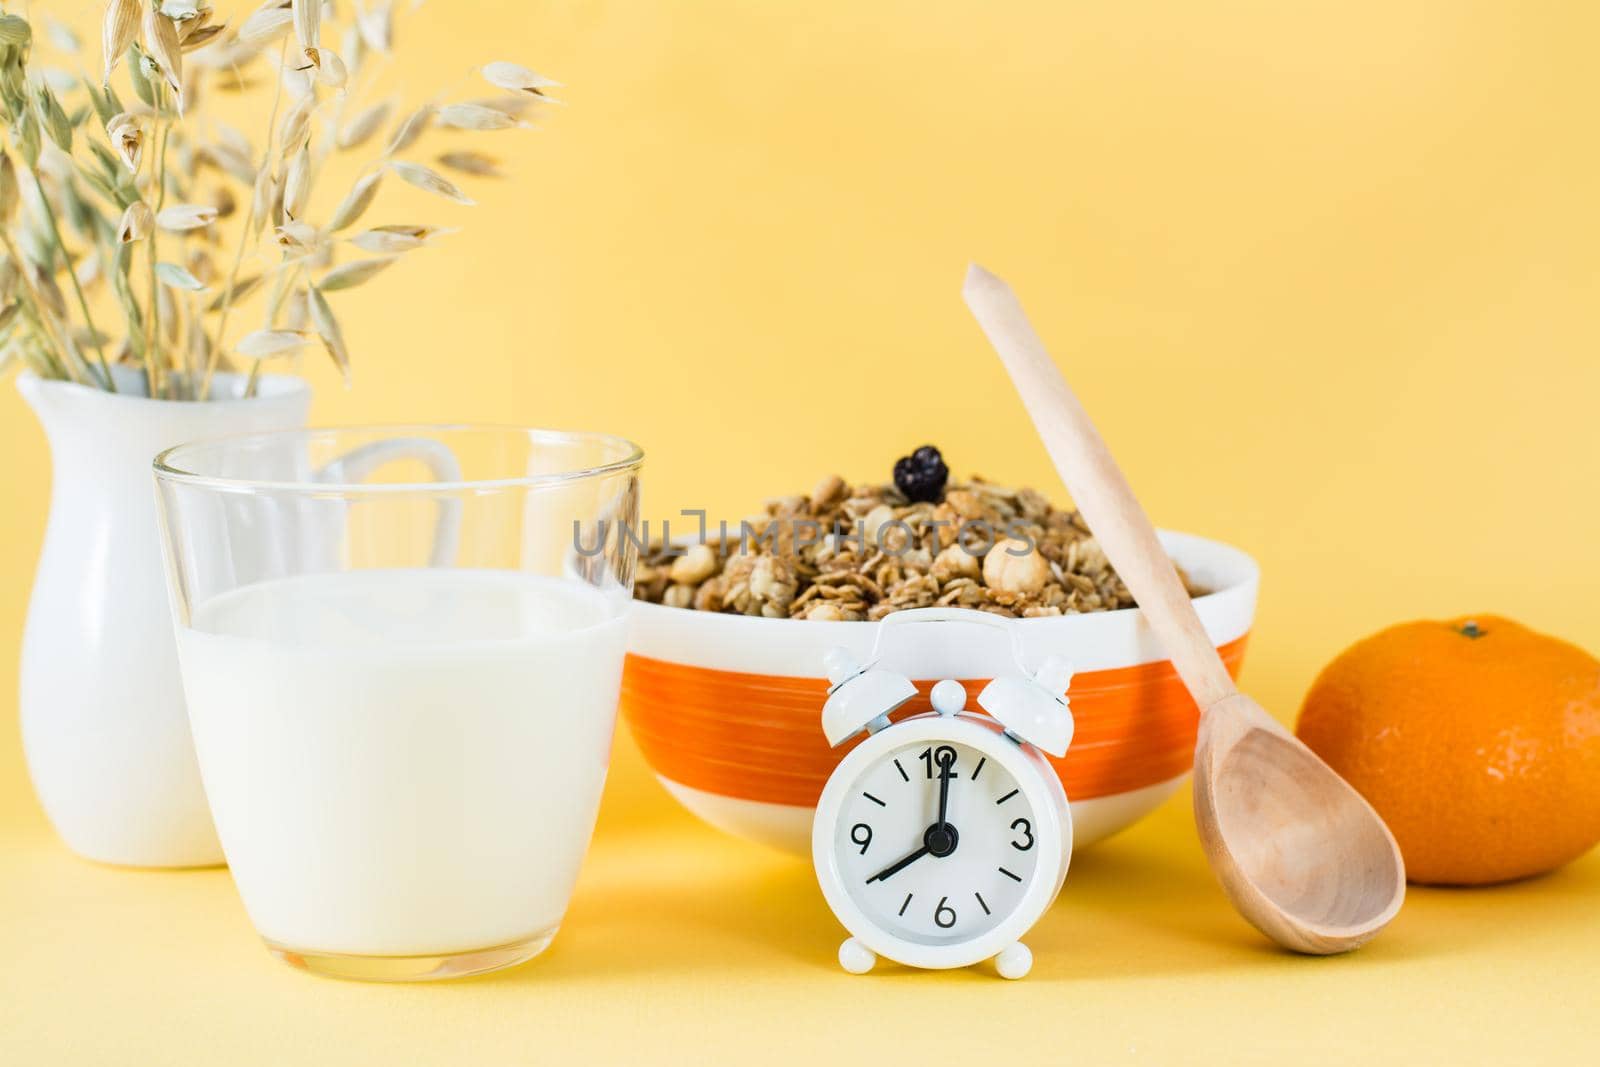 Healthy hearty breakfast. Baked granola in bowl, glass of milk, orange and alarm clock on yellow background